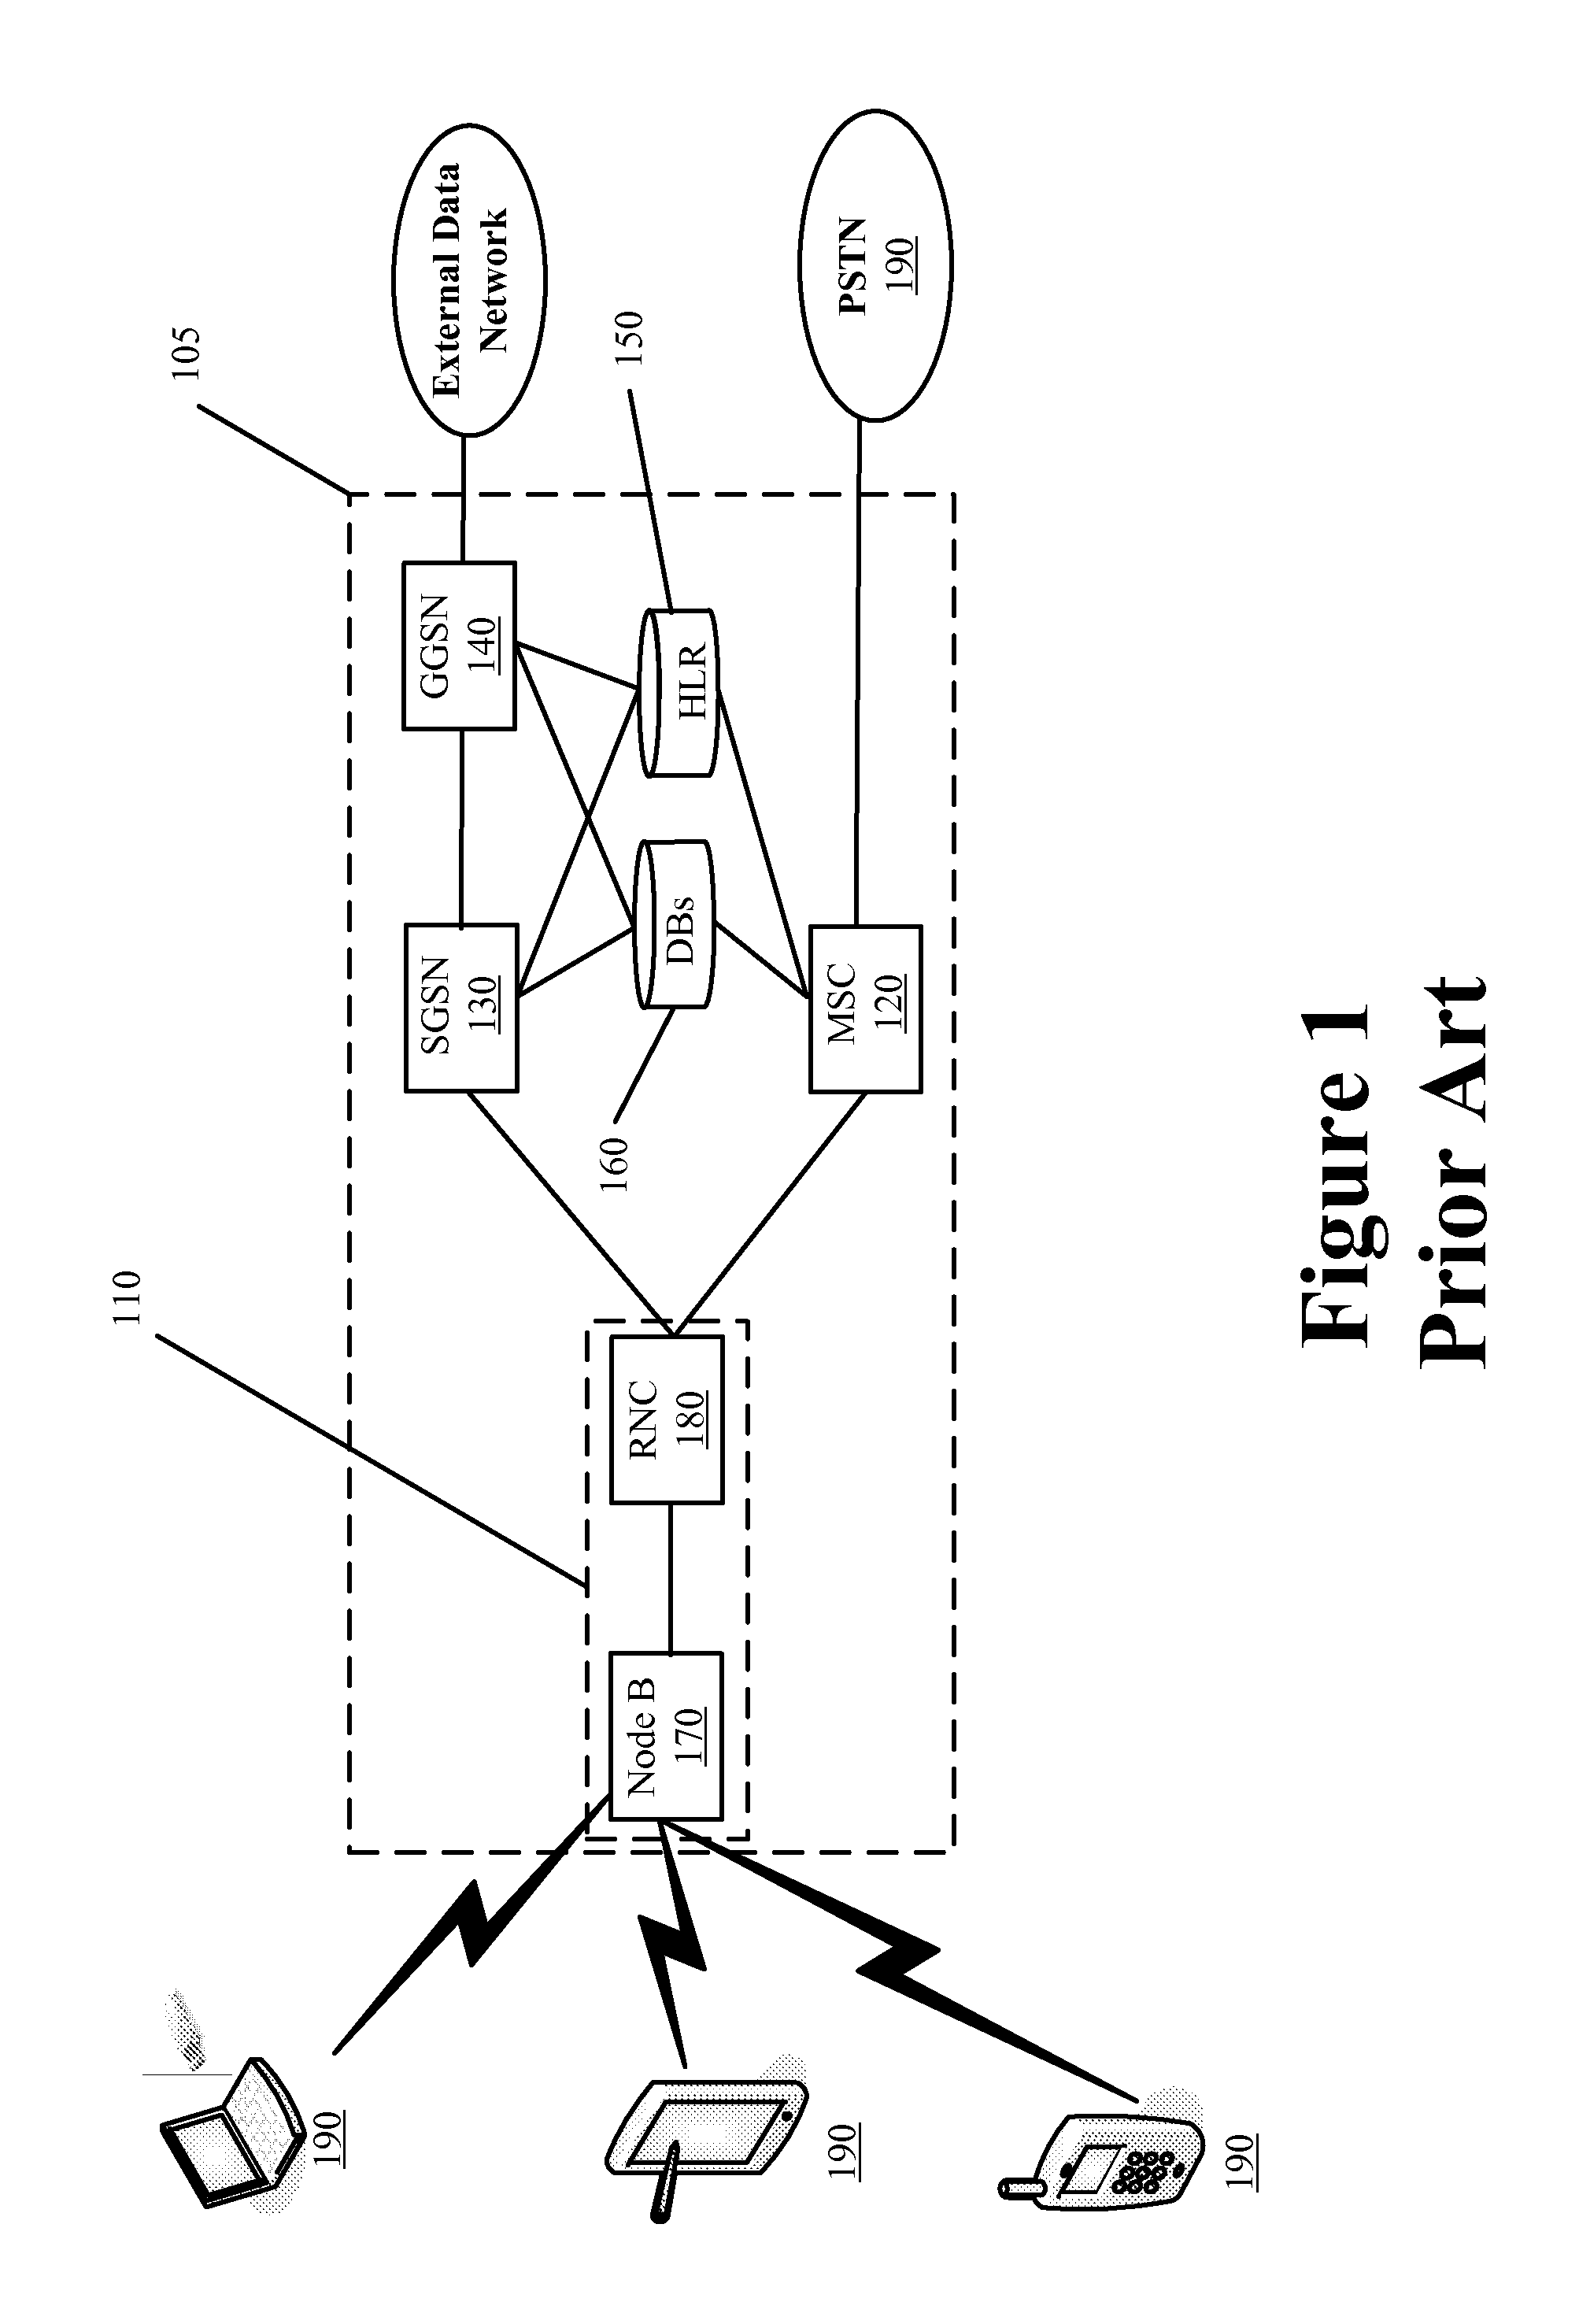 Bandwidth Modification for Transparent Capacity Management in a Carrier Network